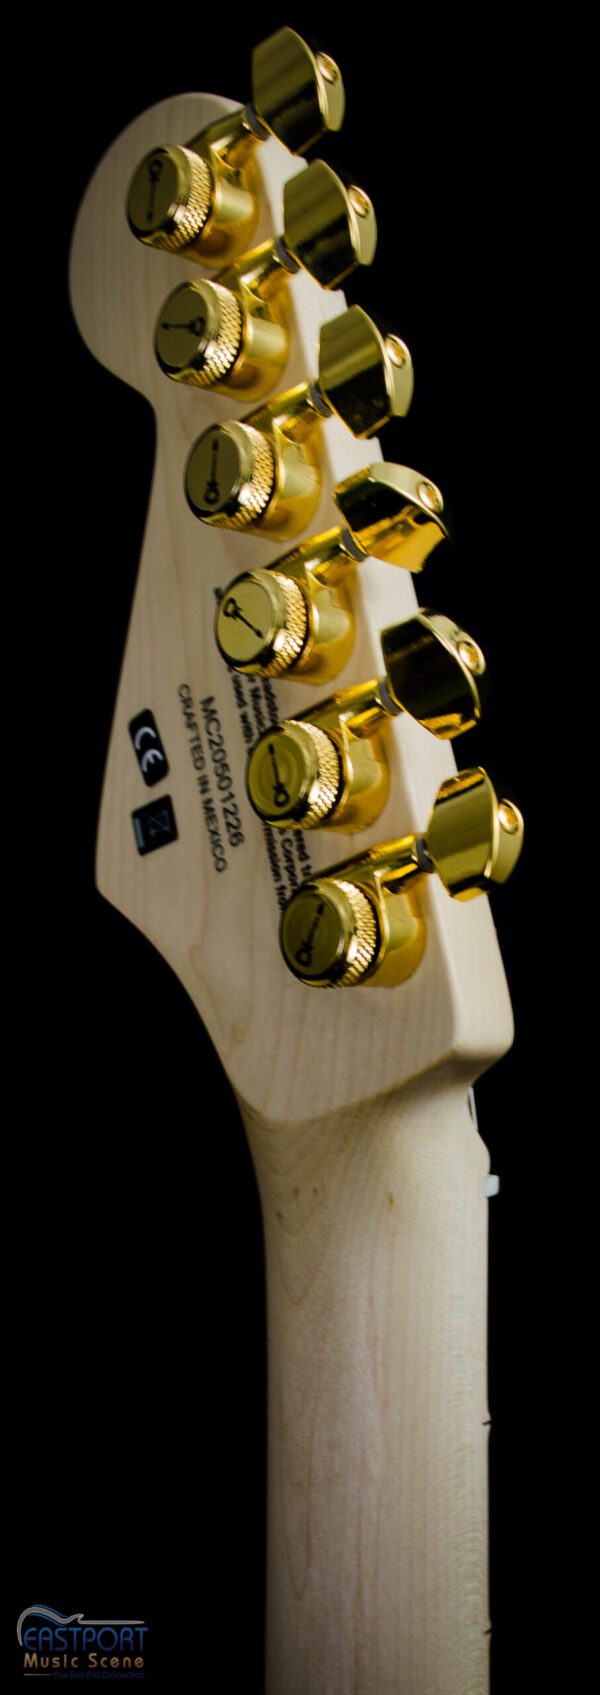 A close up of the headstock and buttons on an electric guitar.